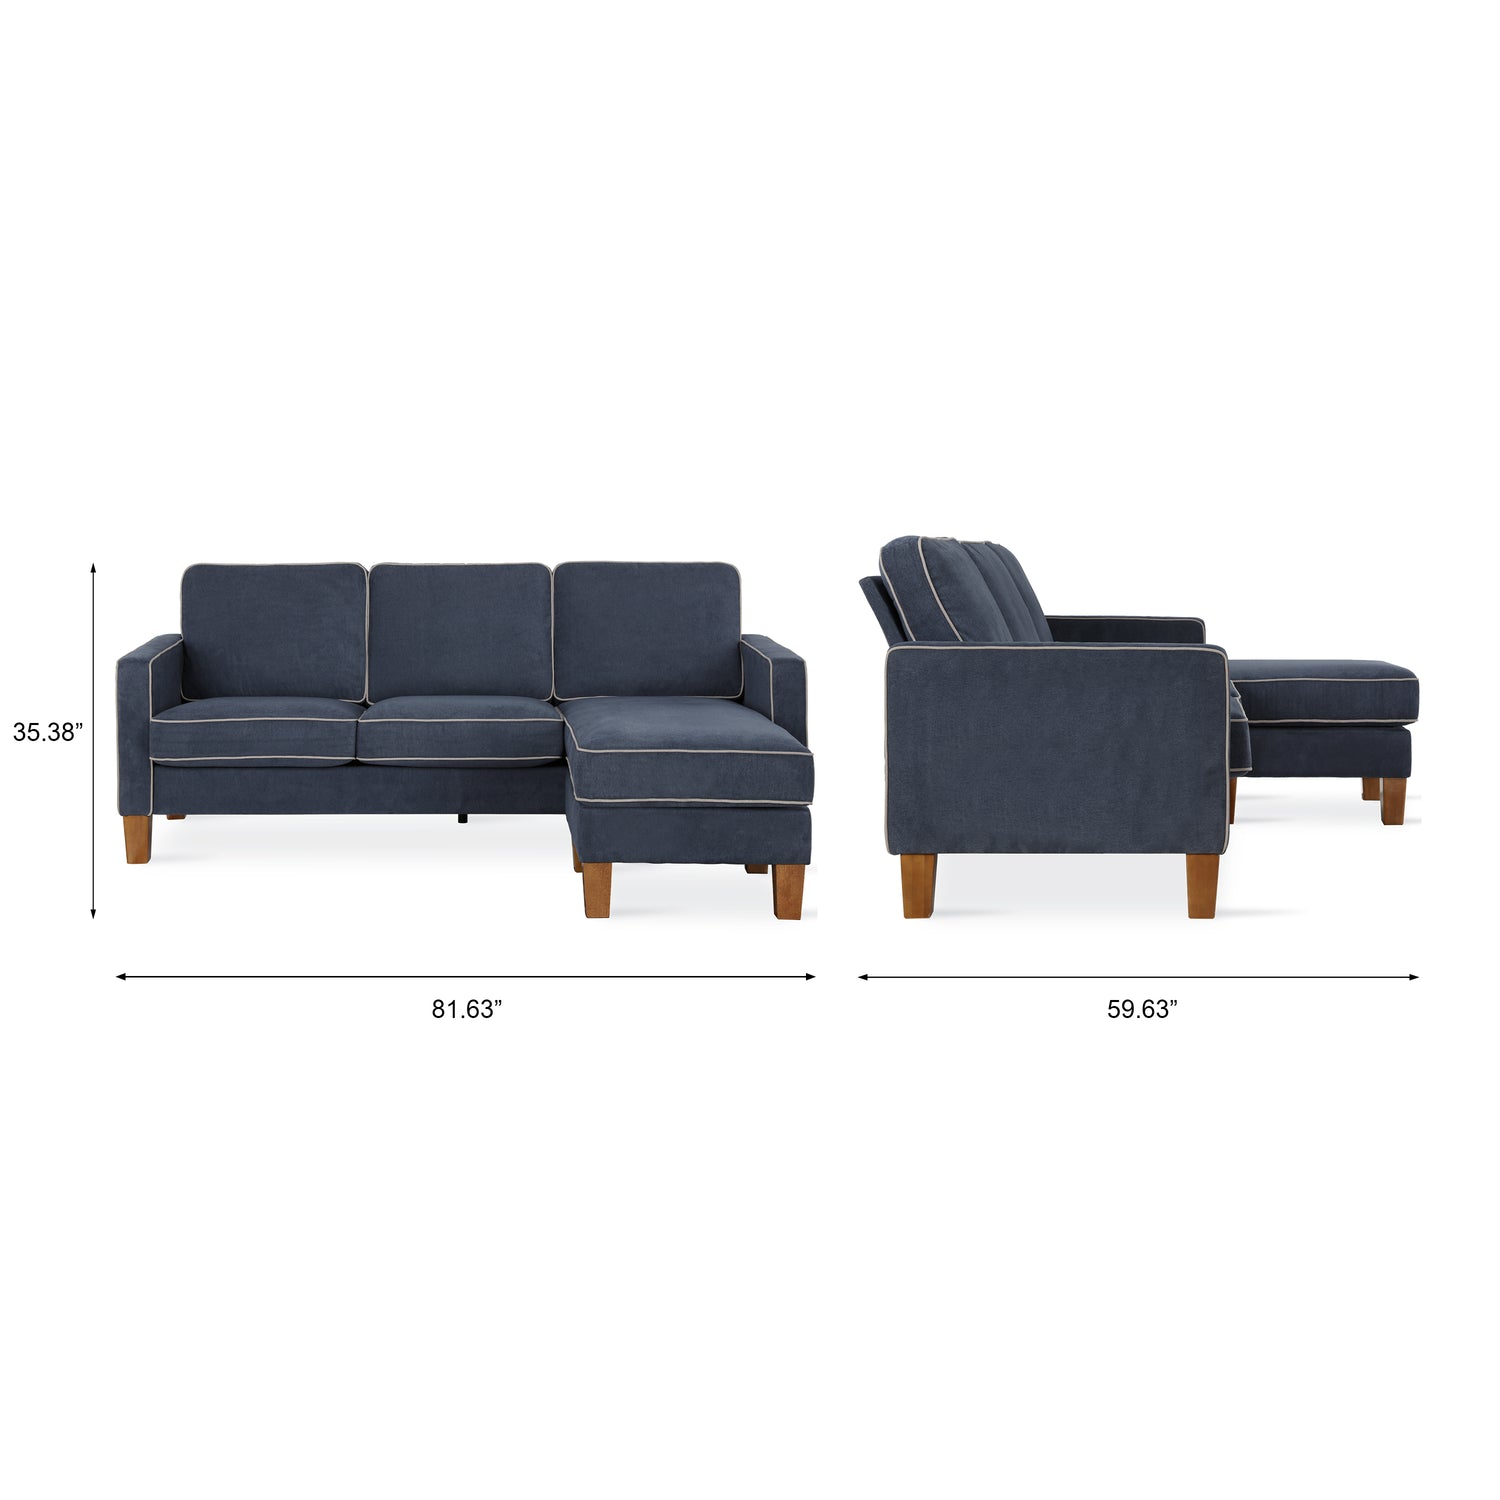 Dorel Home Bowen Corner Sofa with Contrast Welting Dimensions-Better Bed Company 